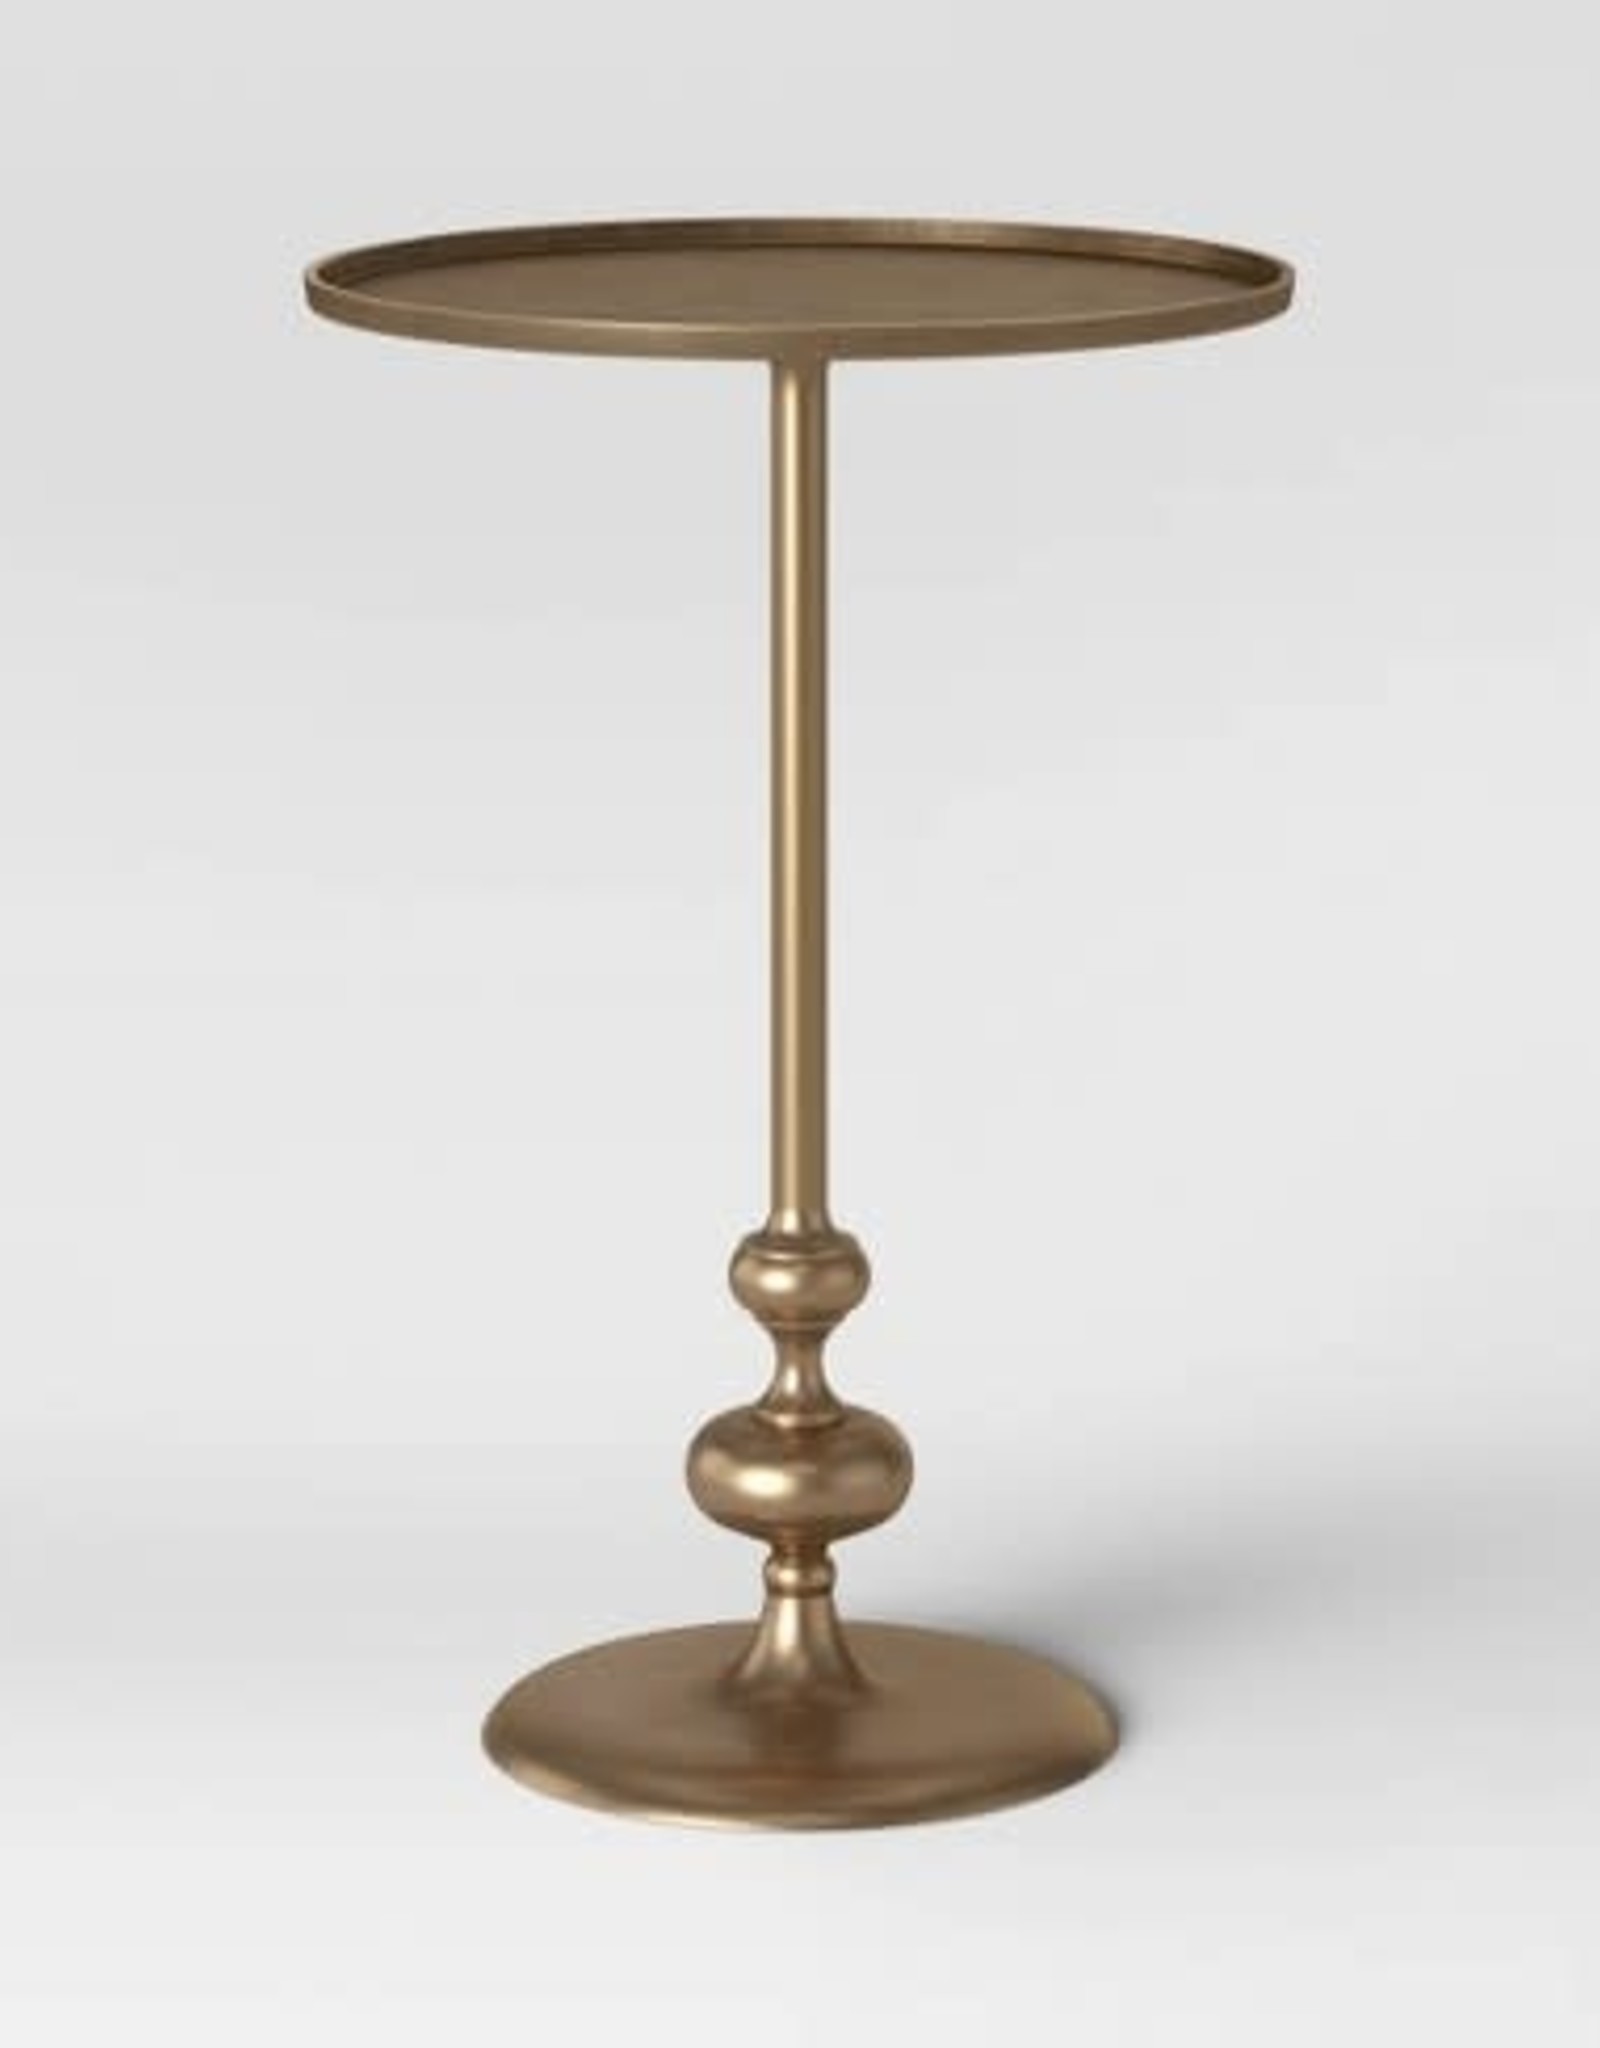 Threshold Londonberry Accent Table